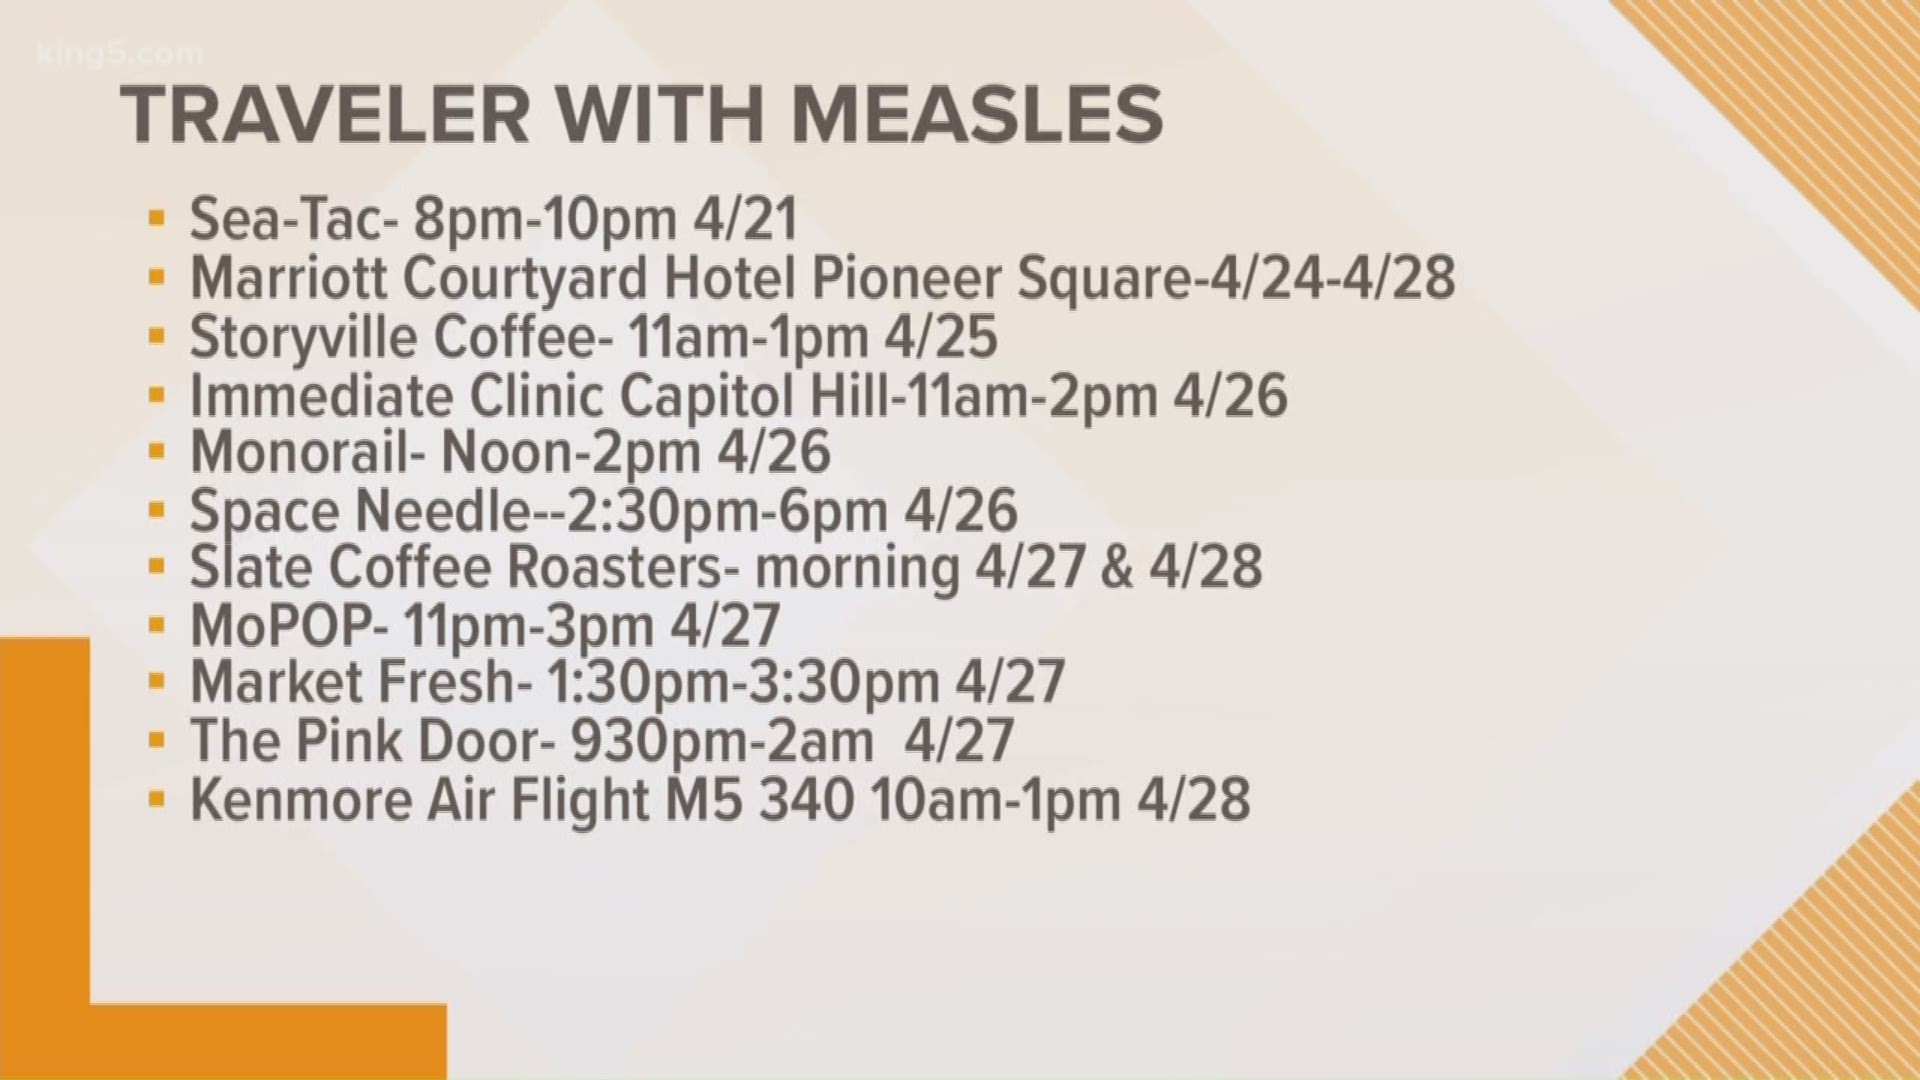 A Canadian man, who has tested positive for measles, visited several popular tourist spots around Seattle in late April.